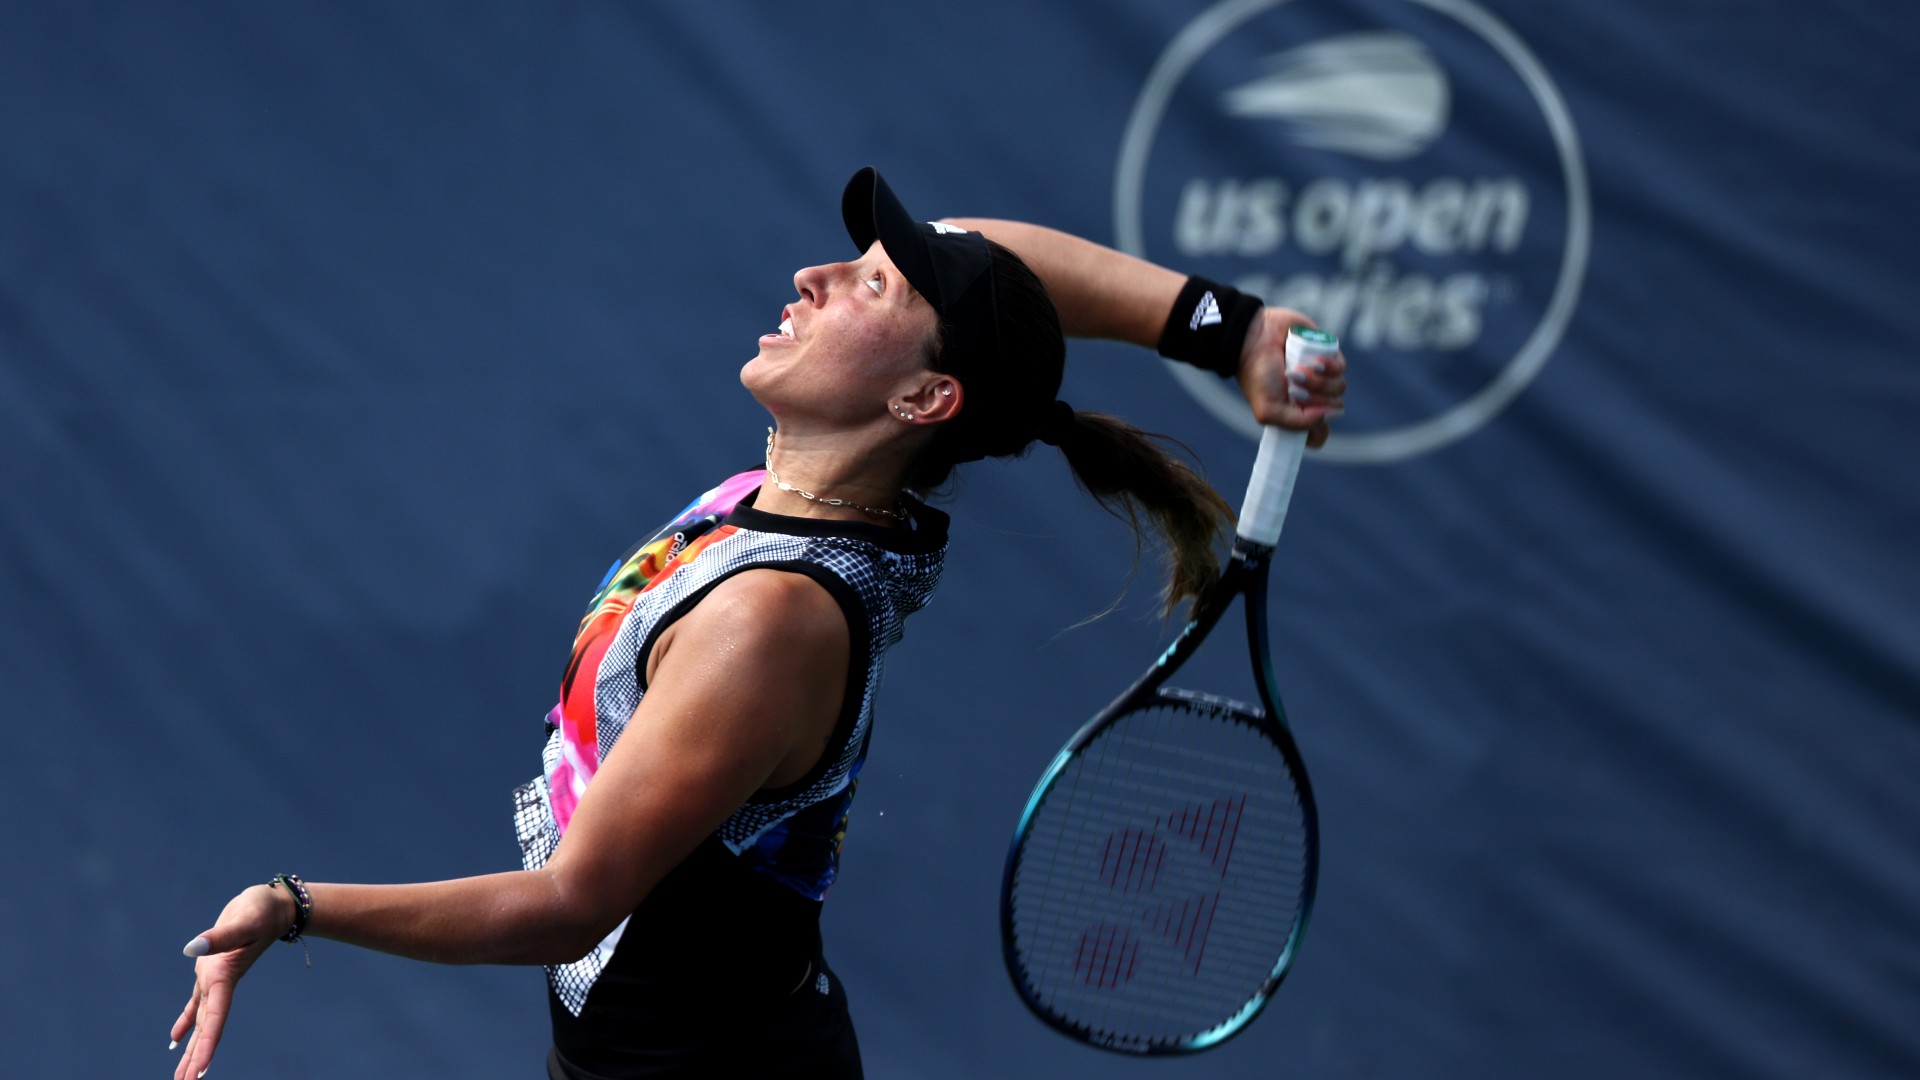 Monday US Open Betting Predictions & Previews: Pegula Will Stymie Kvitova’s Power (September 5) article feature image